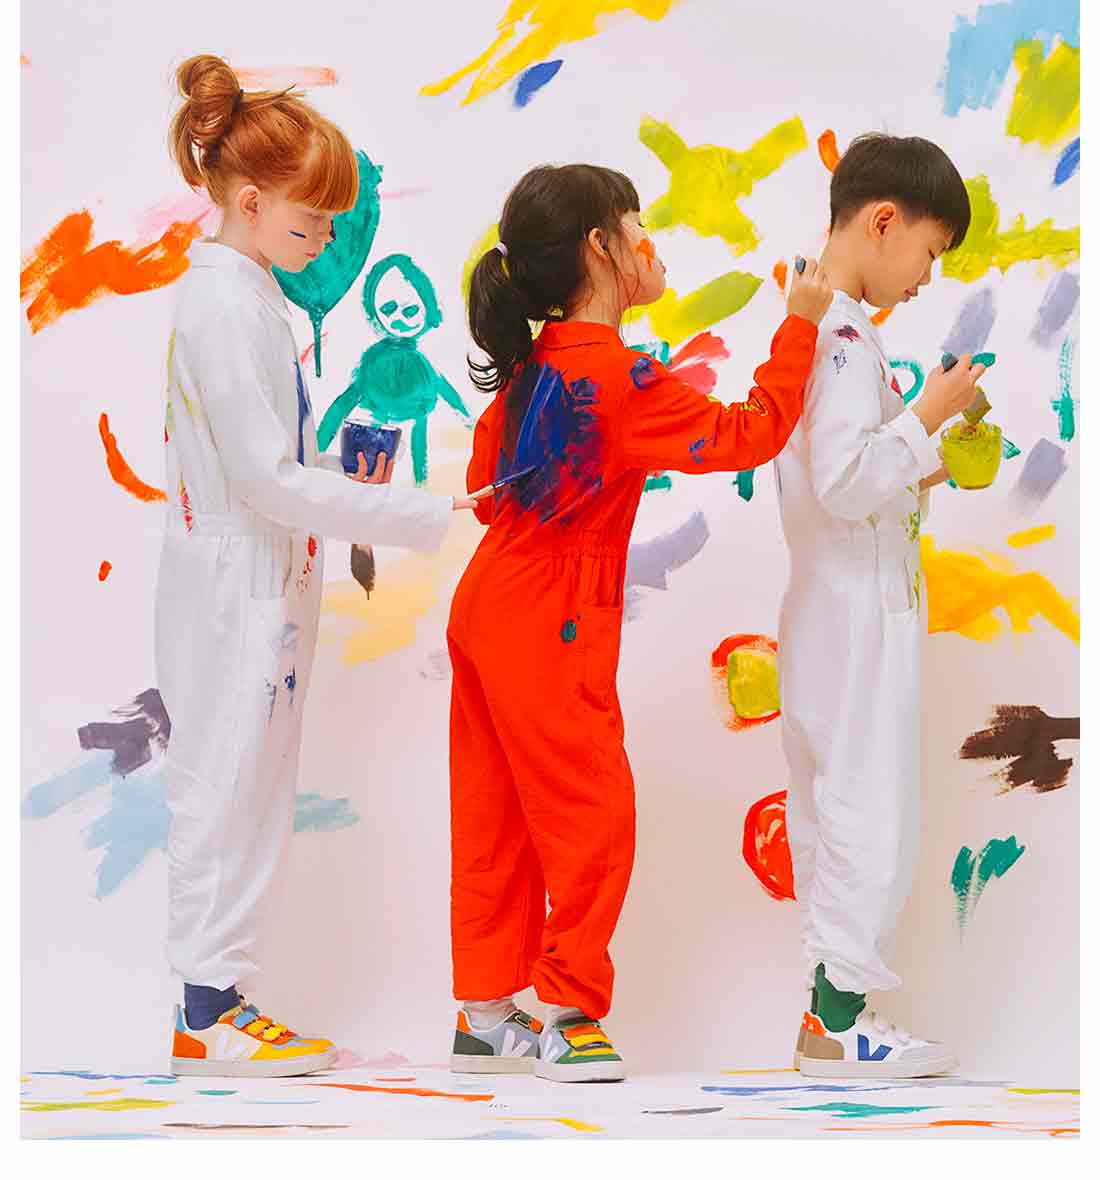 A group of children painting on painters' suits.